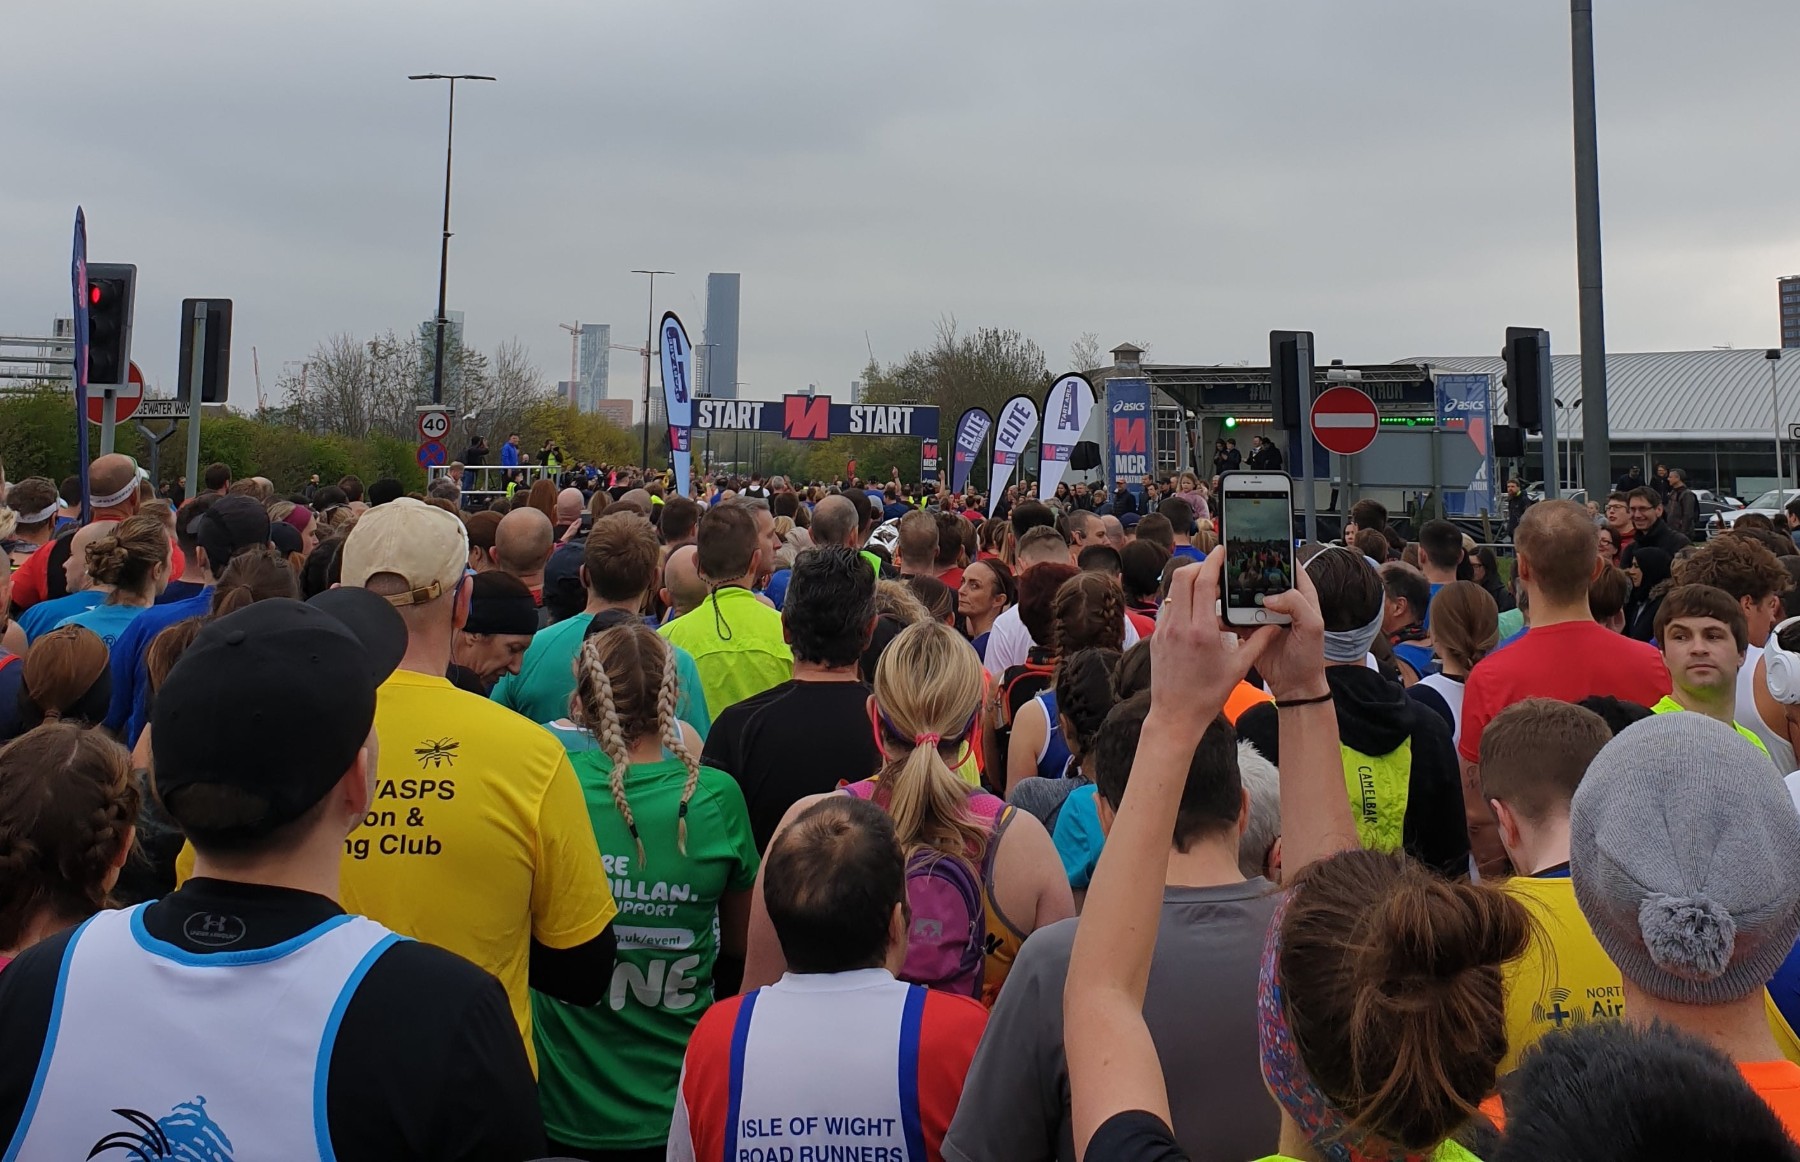 5 Things I Learnt From Running A Marathon